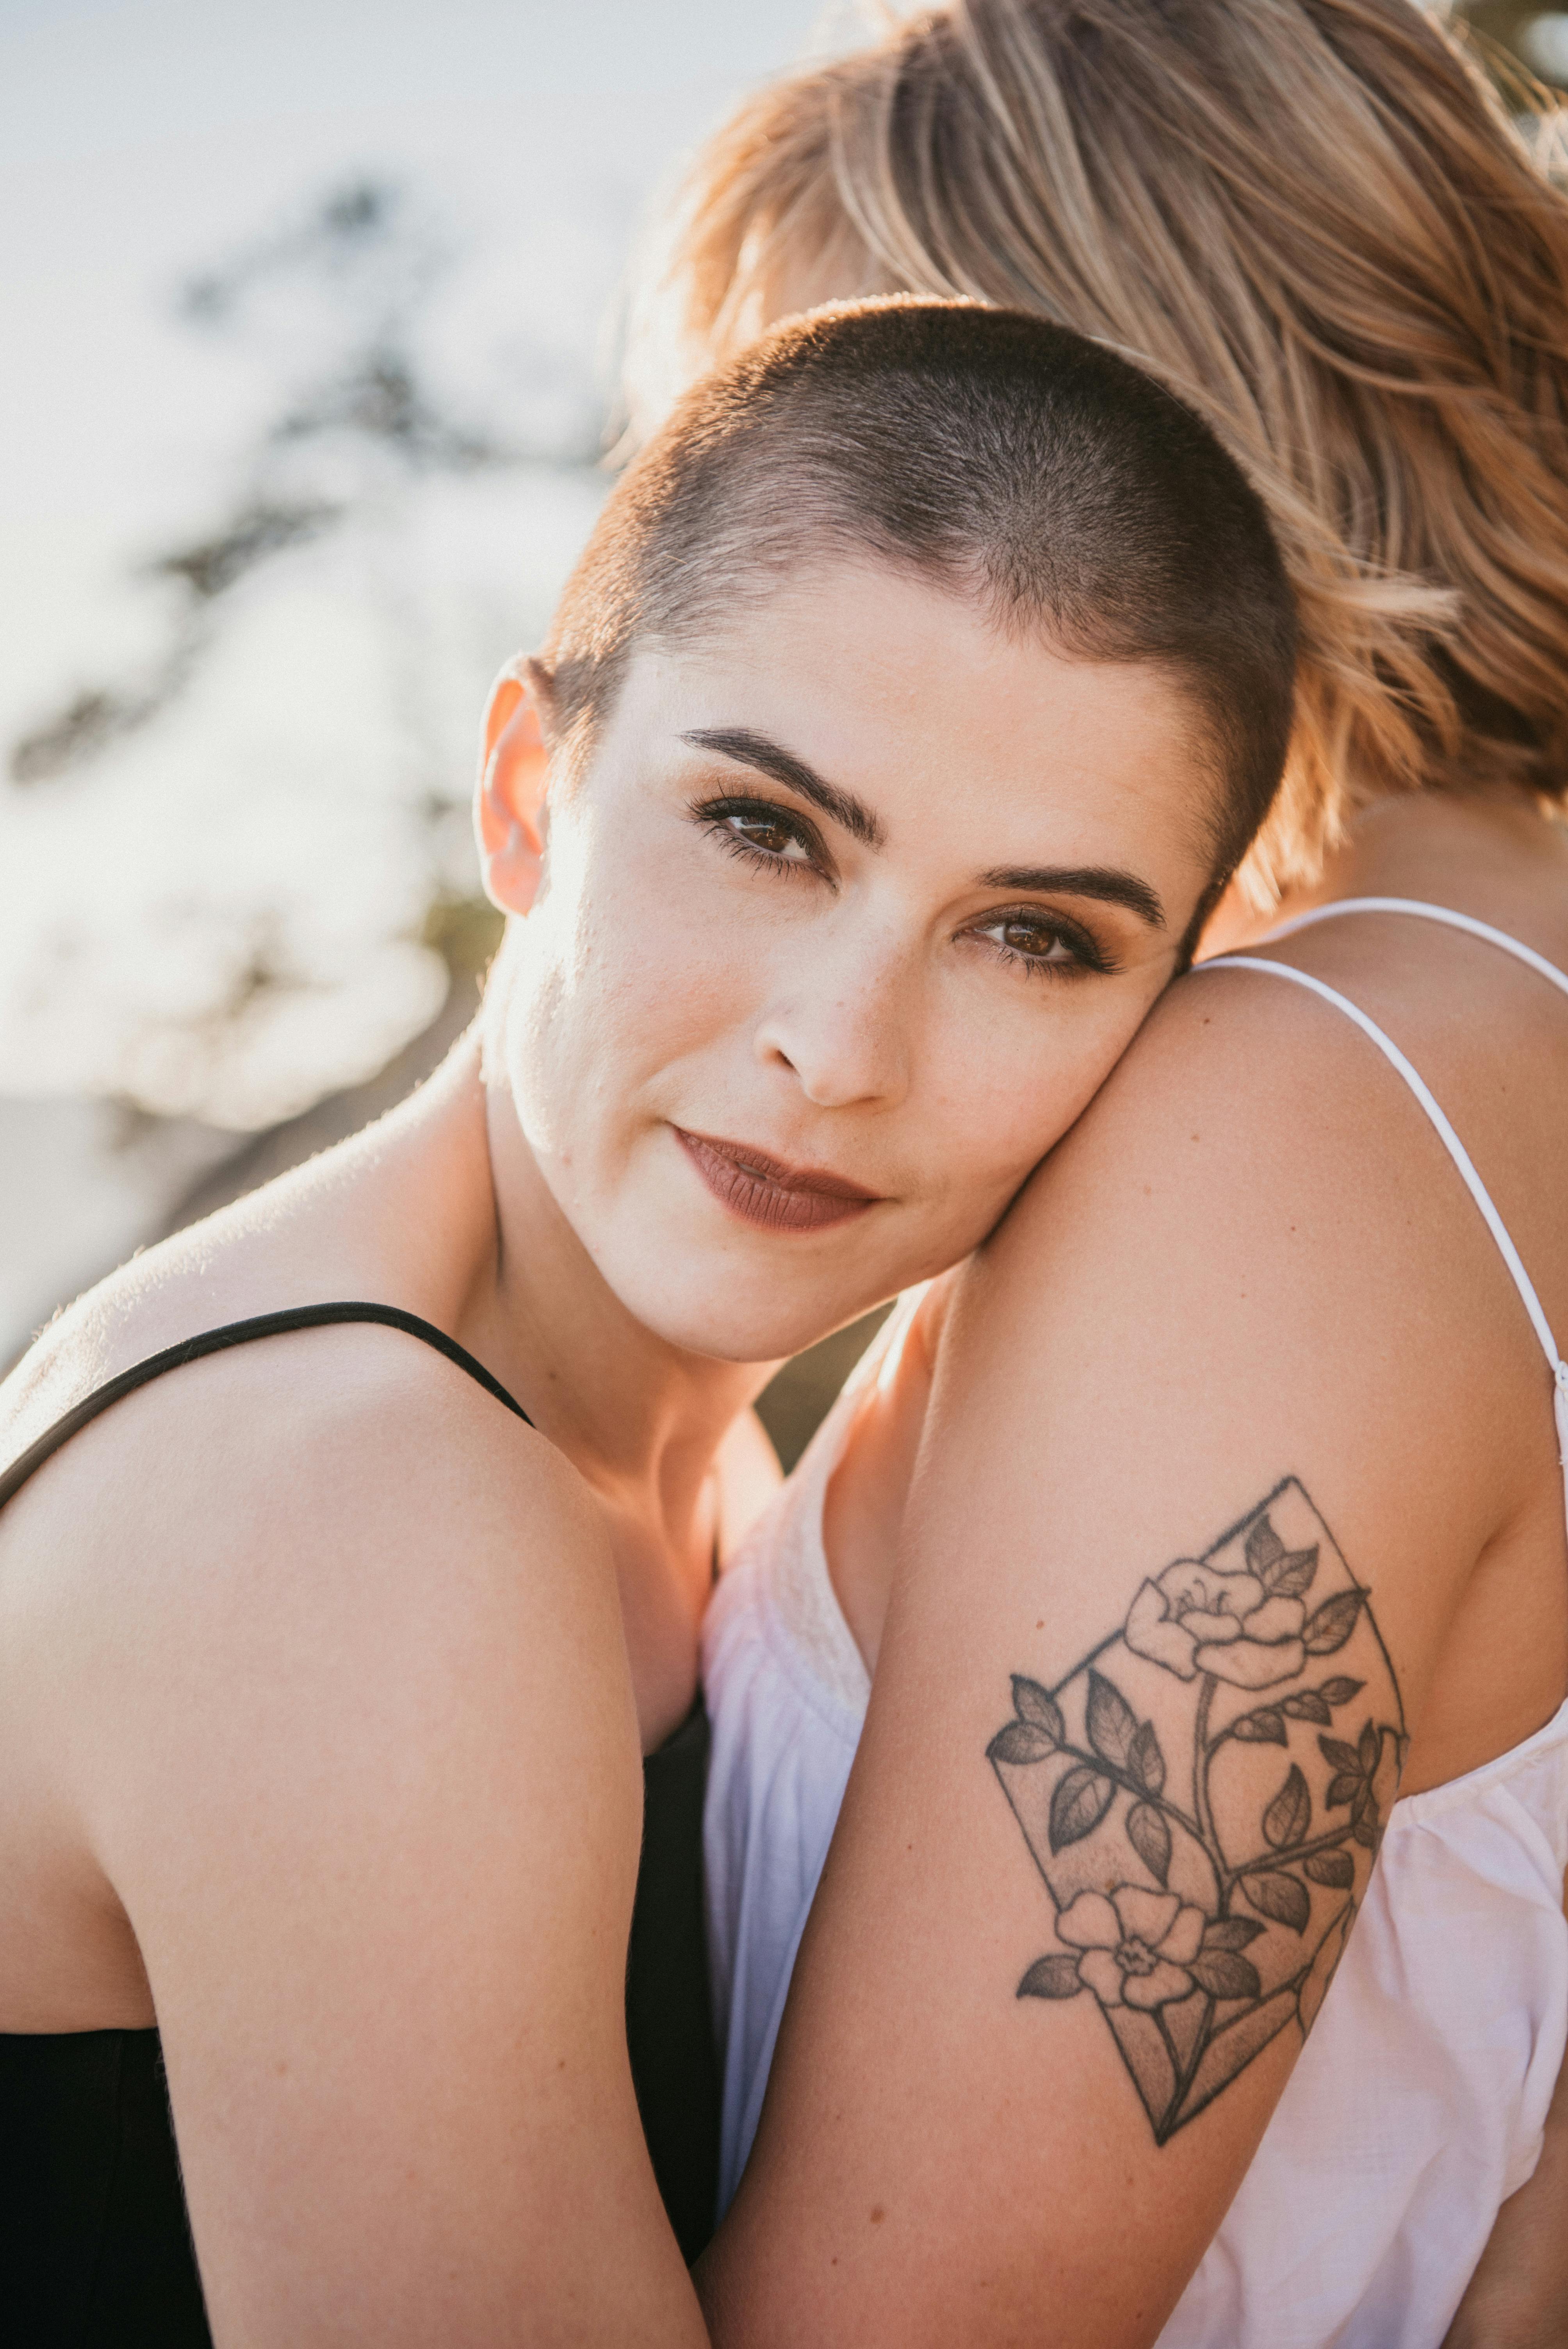 Woman Hugging Man with Tattoos · Free Stock Photo